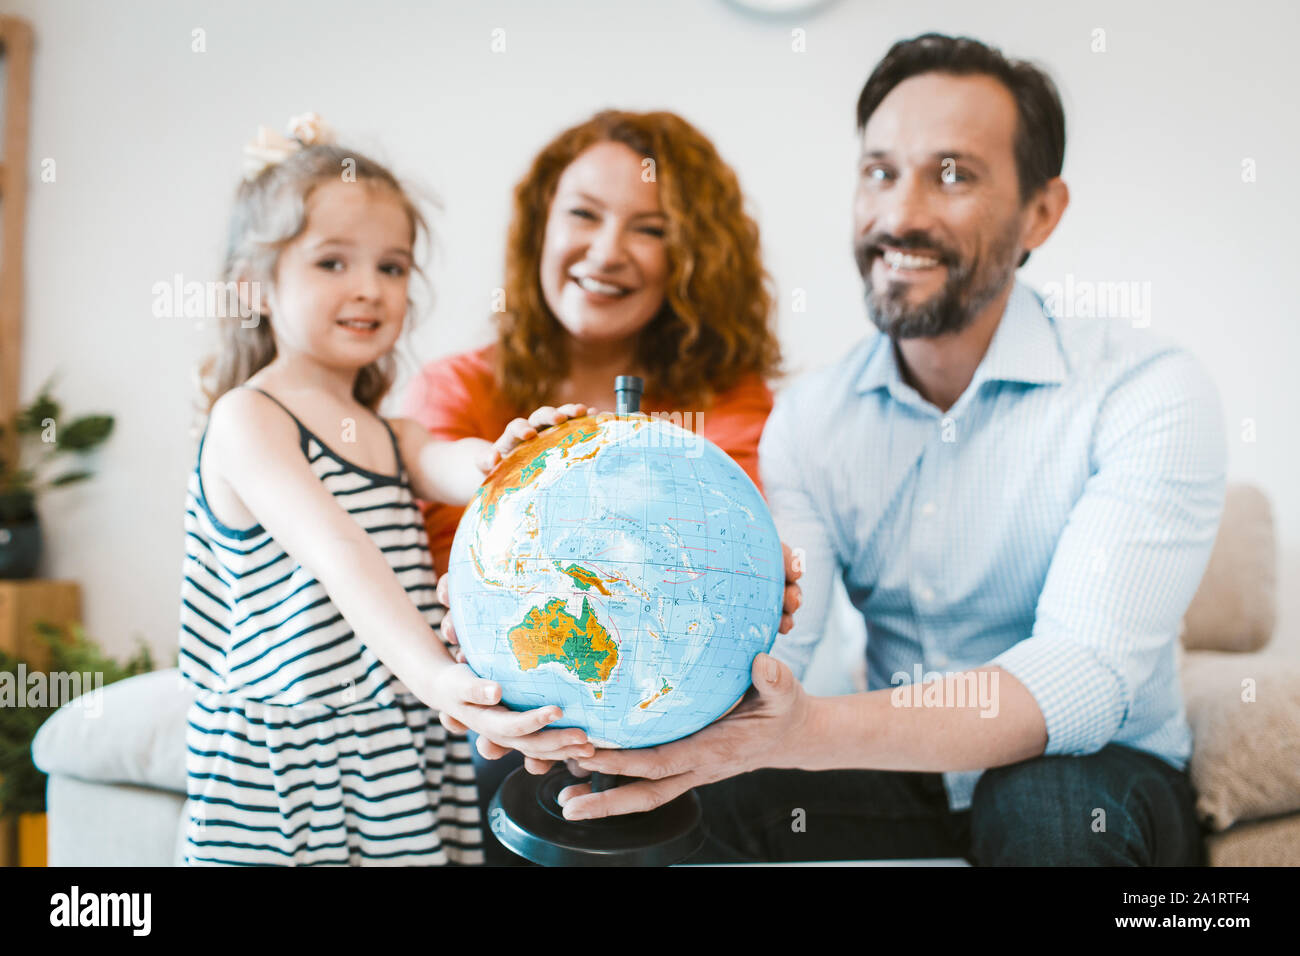 Mom, dad and little girl planning vacation, holding globe. Stock Photo